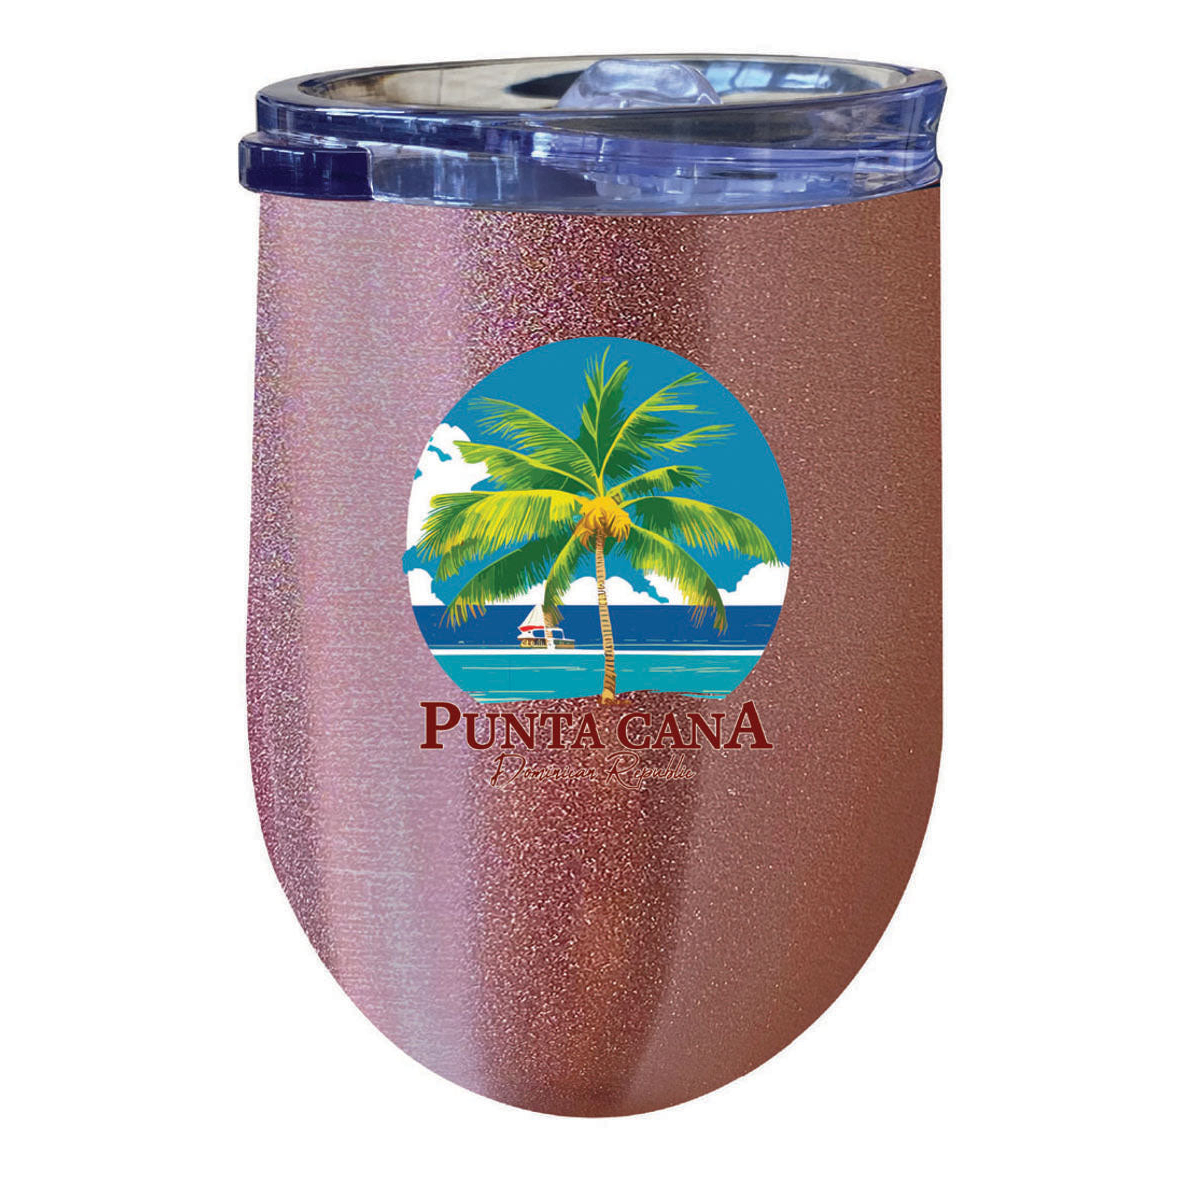 Punta Cana Dominican Republic Souvenir 12 Oz Insulated Wine Stainless Steel Tumbler - Rose Gold, PALM